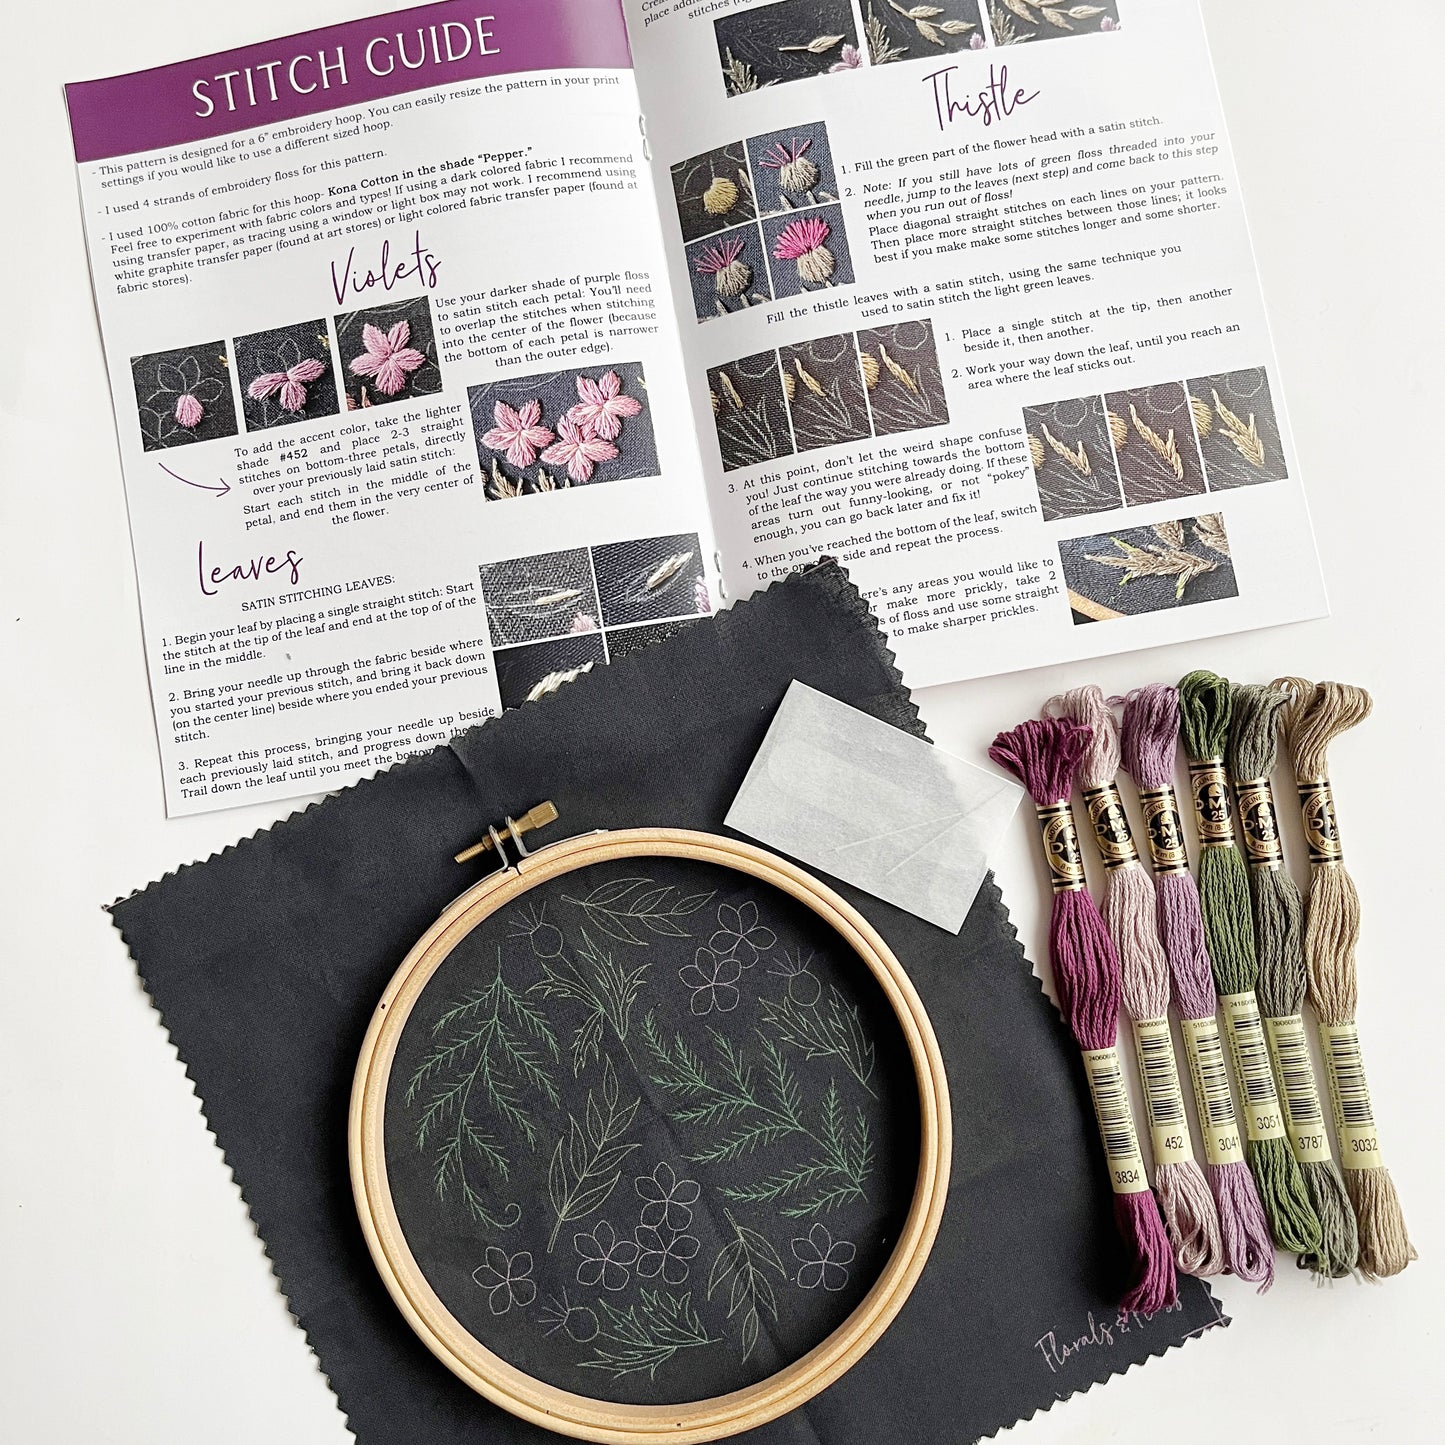 Ferns and Thistles Embroidery Kit